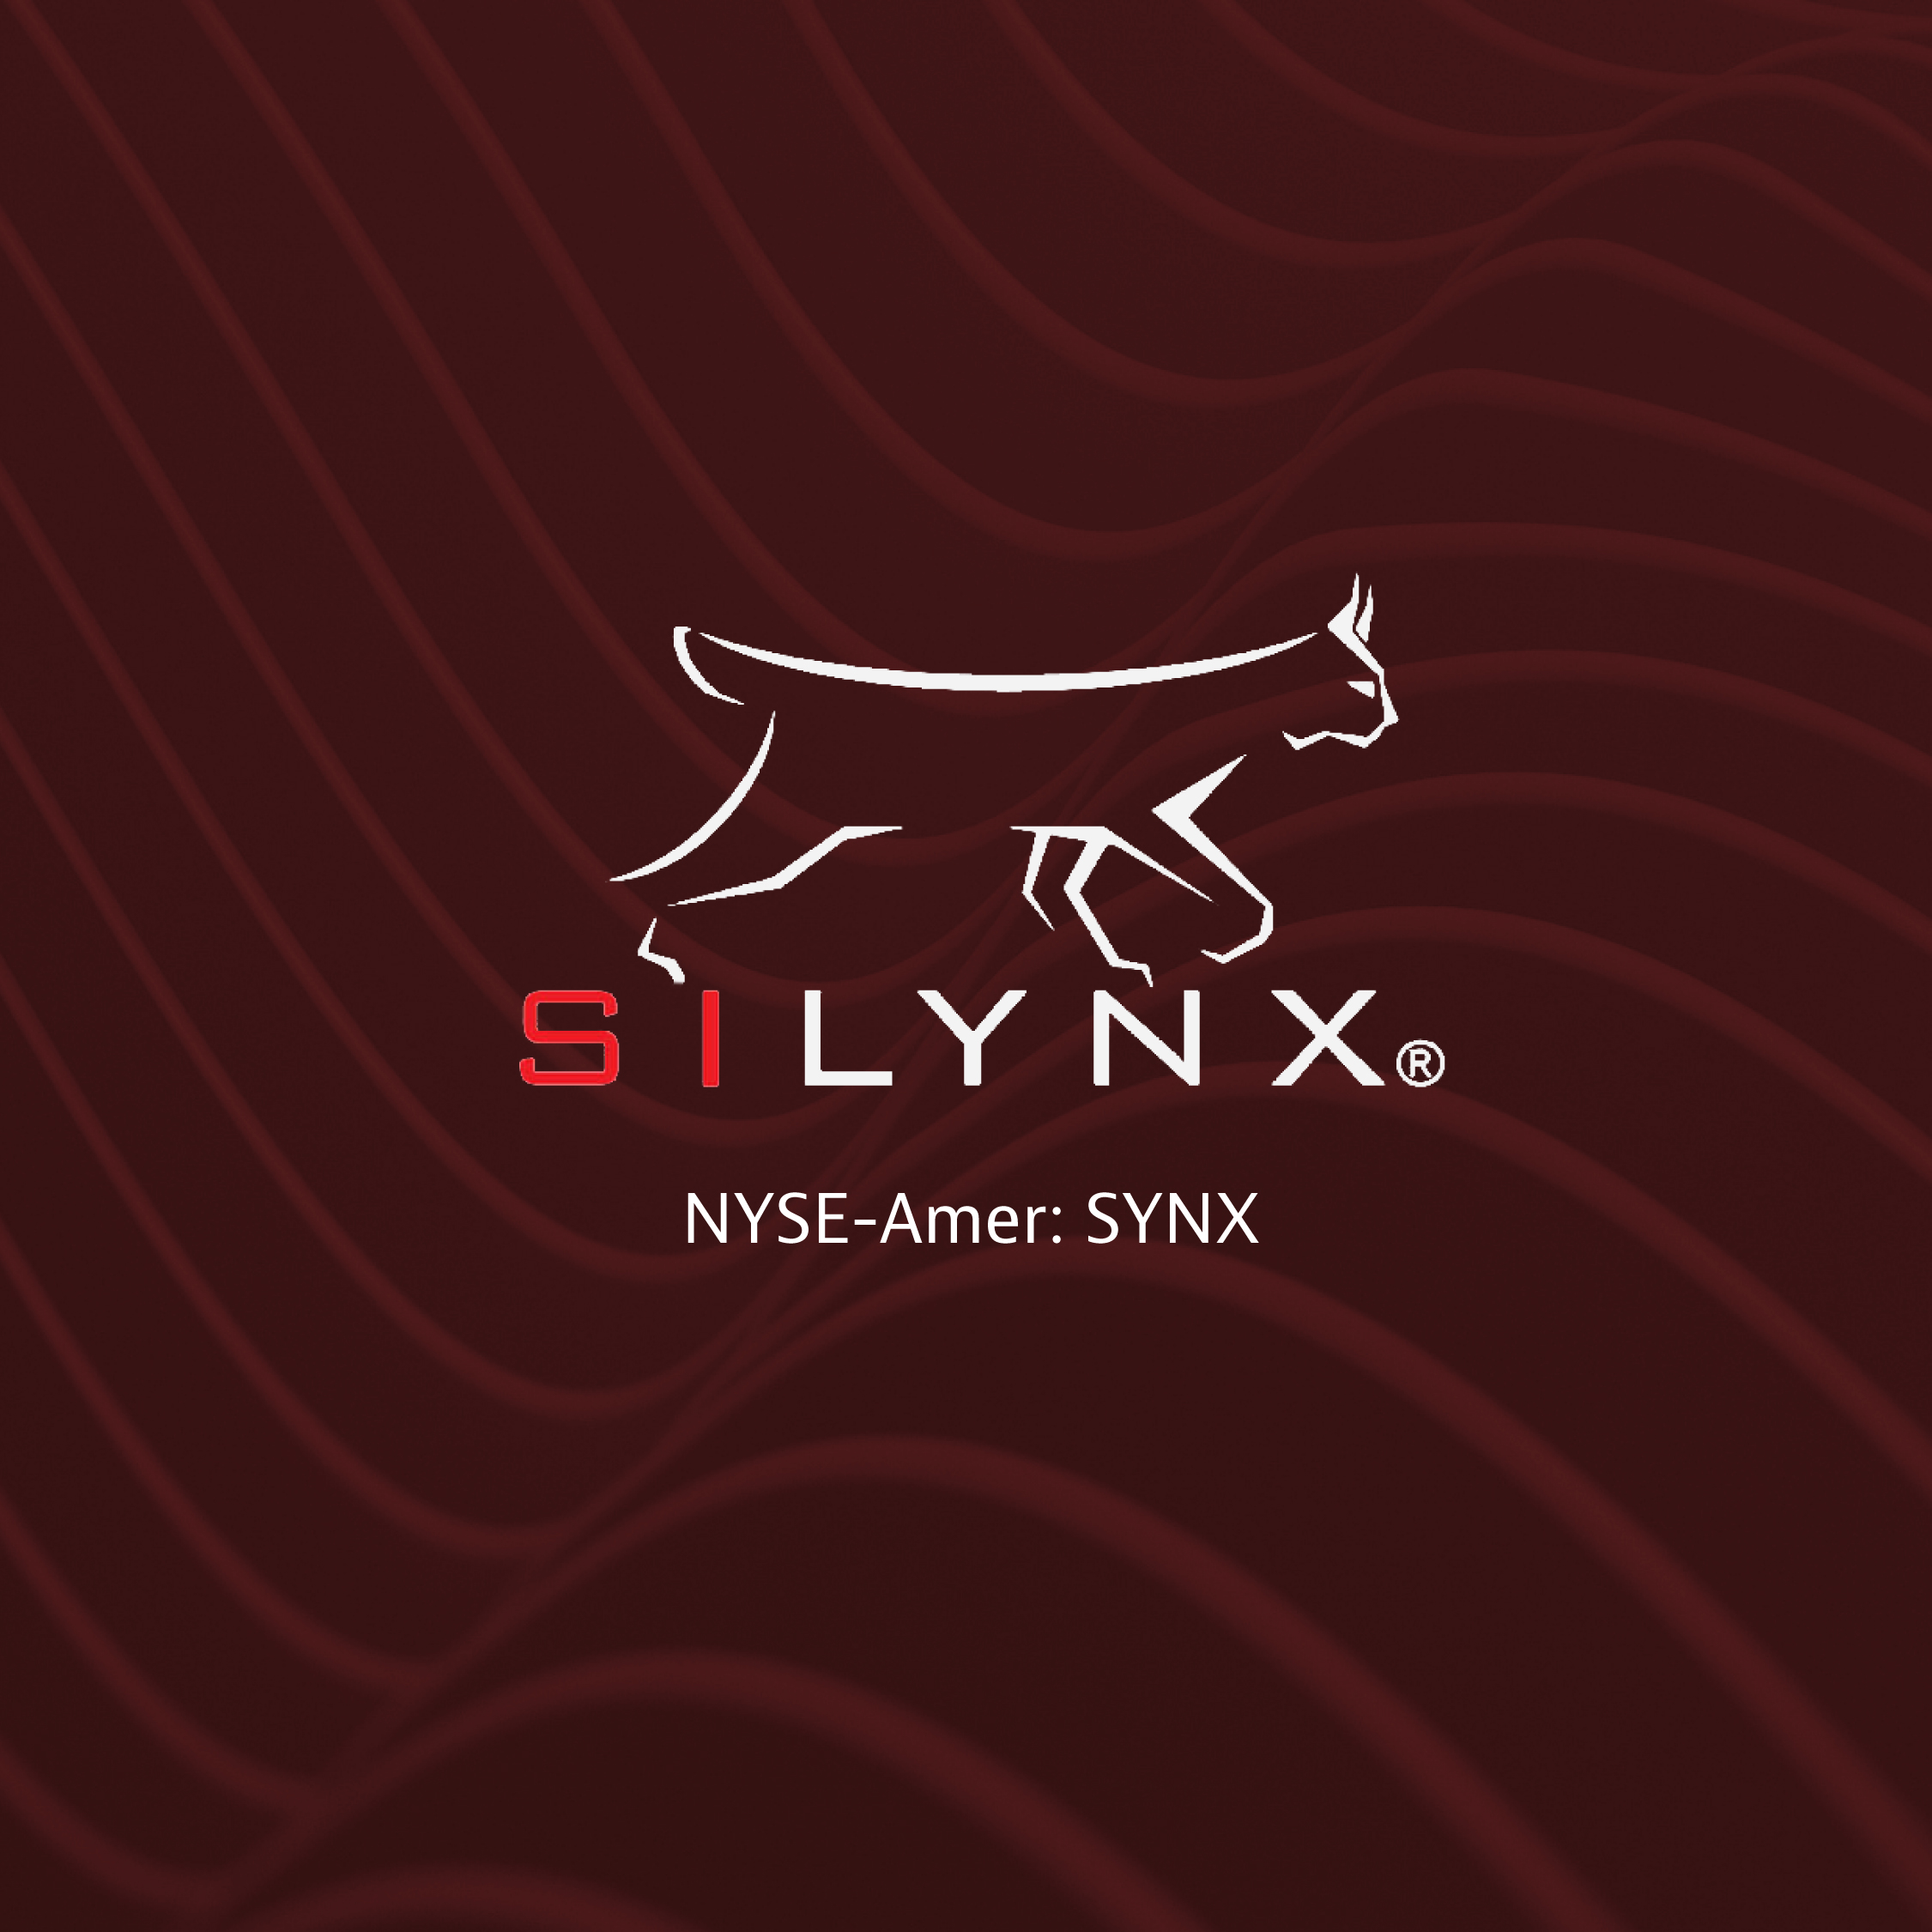 Silynxcom Stock Spikes 15% In February As Demand For Its Industry-Leading In-Ear Communications Equipment Steepens ($SYNX)